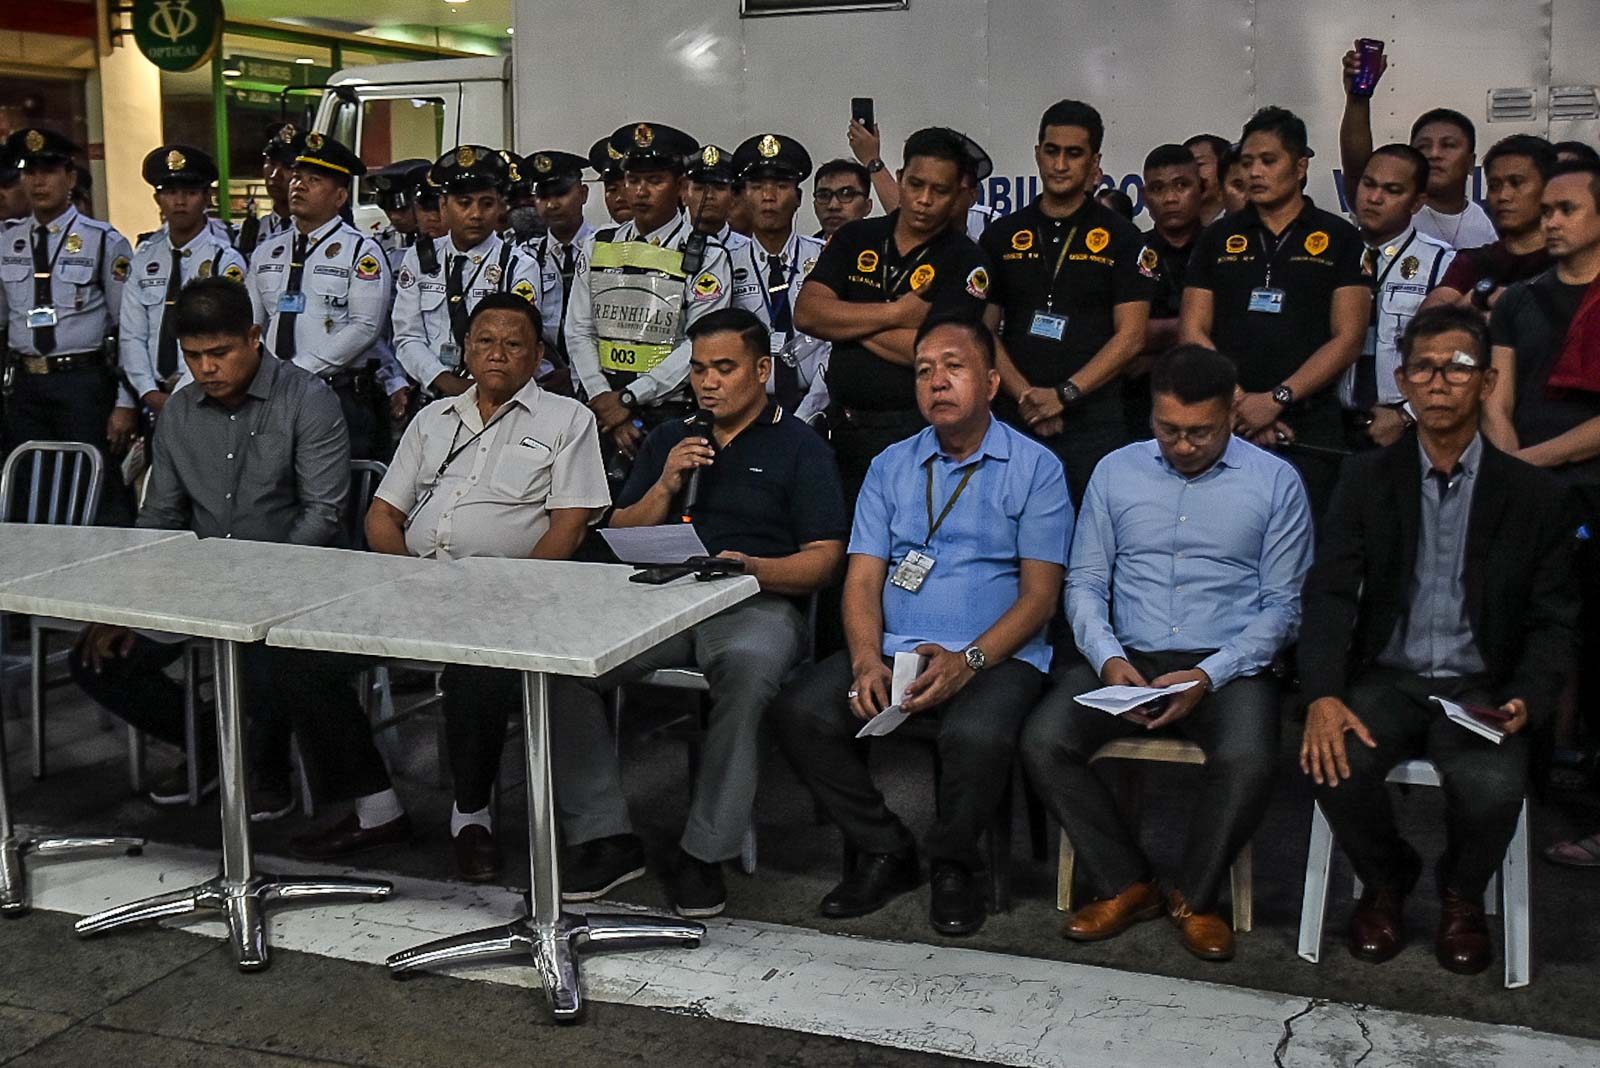 Greenhills hostage taker’s bosses apologize, resign in bid to end crisis